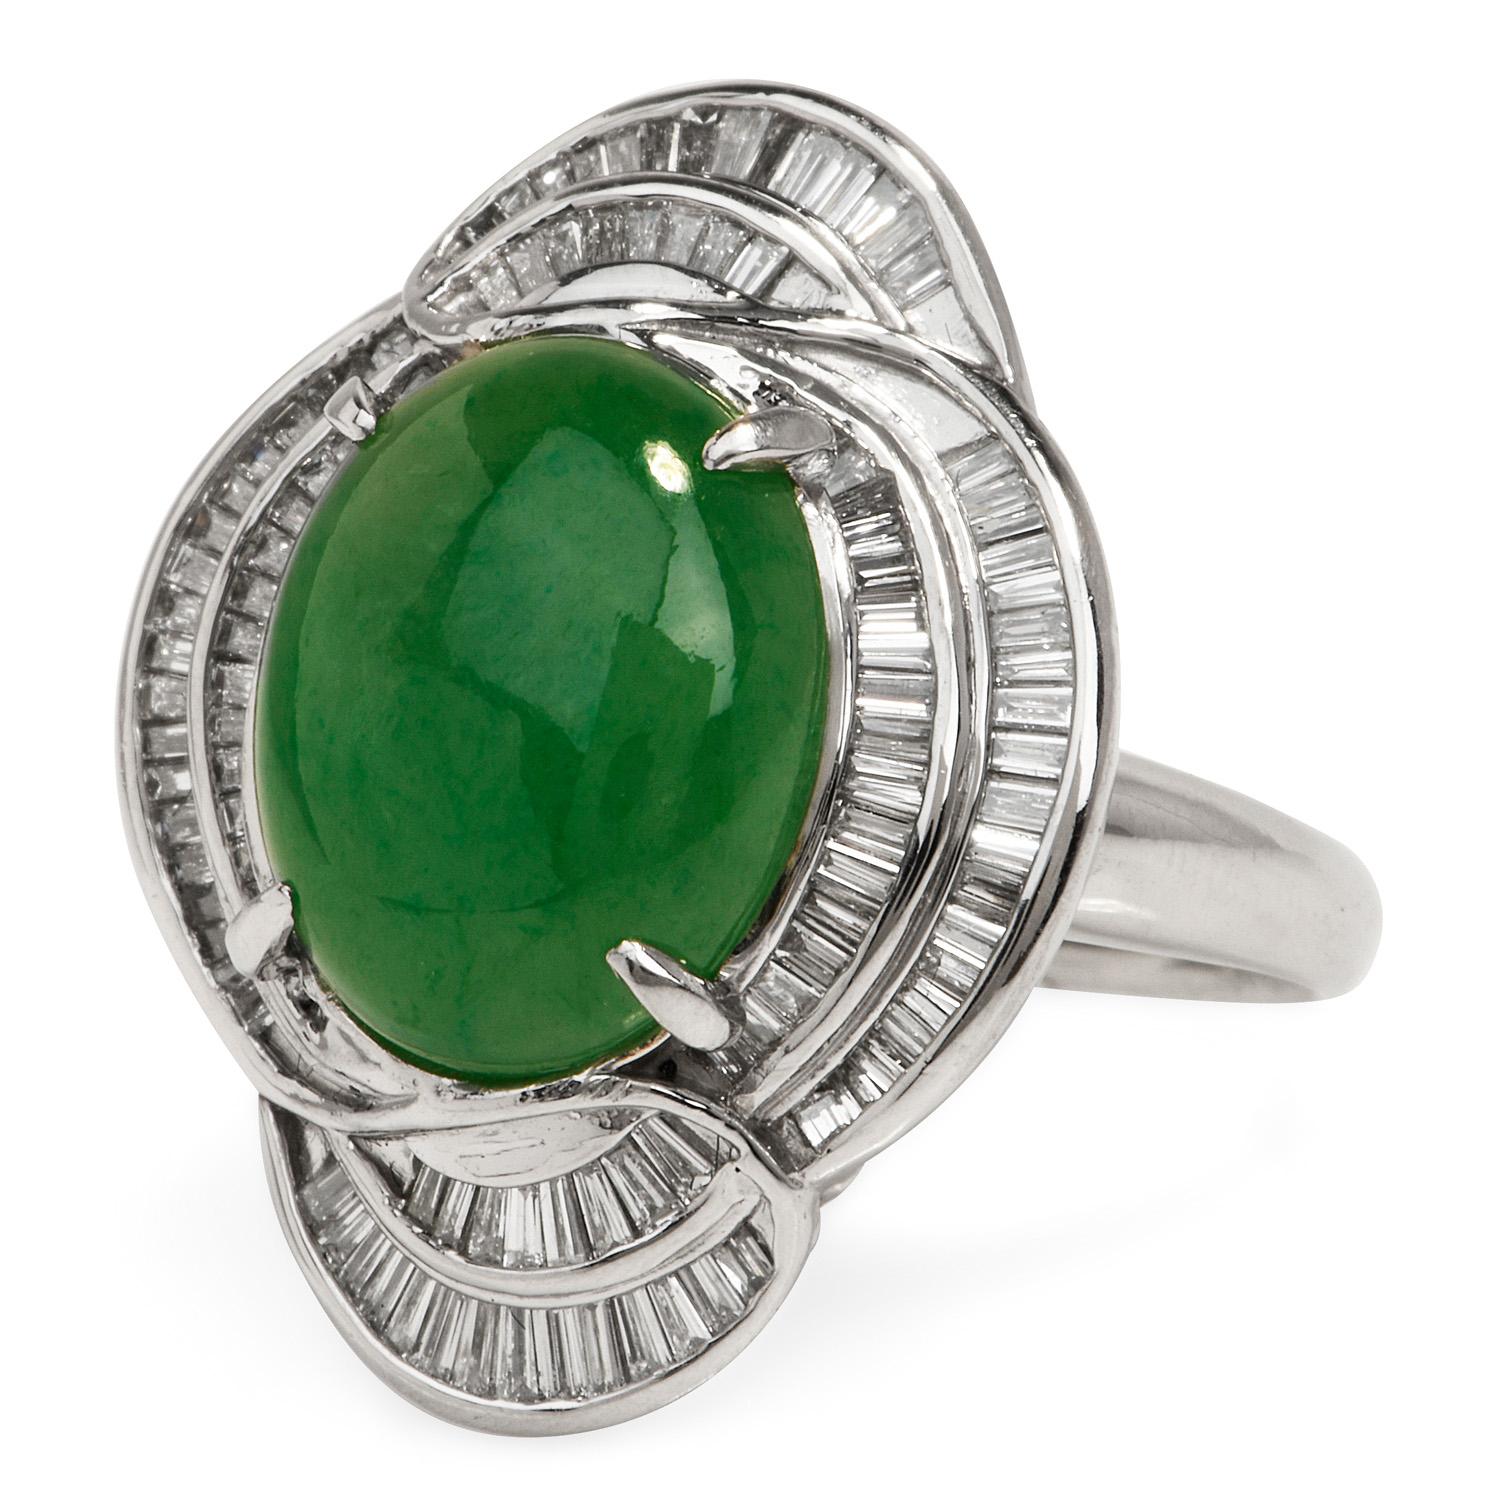 This Harvest Green natural GIA Certified Jade and Diamond Cocktail ring is  crafted in luxurious Platinum.

An oval shaped genuine natural Green Jade adorns the center of this stately piece weighing appx. 6.61 carats. Contrasting its shape are